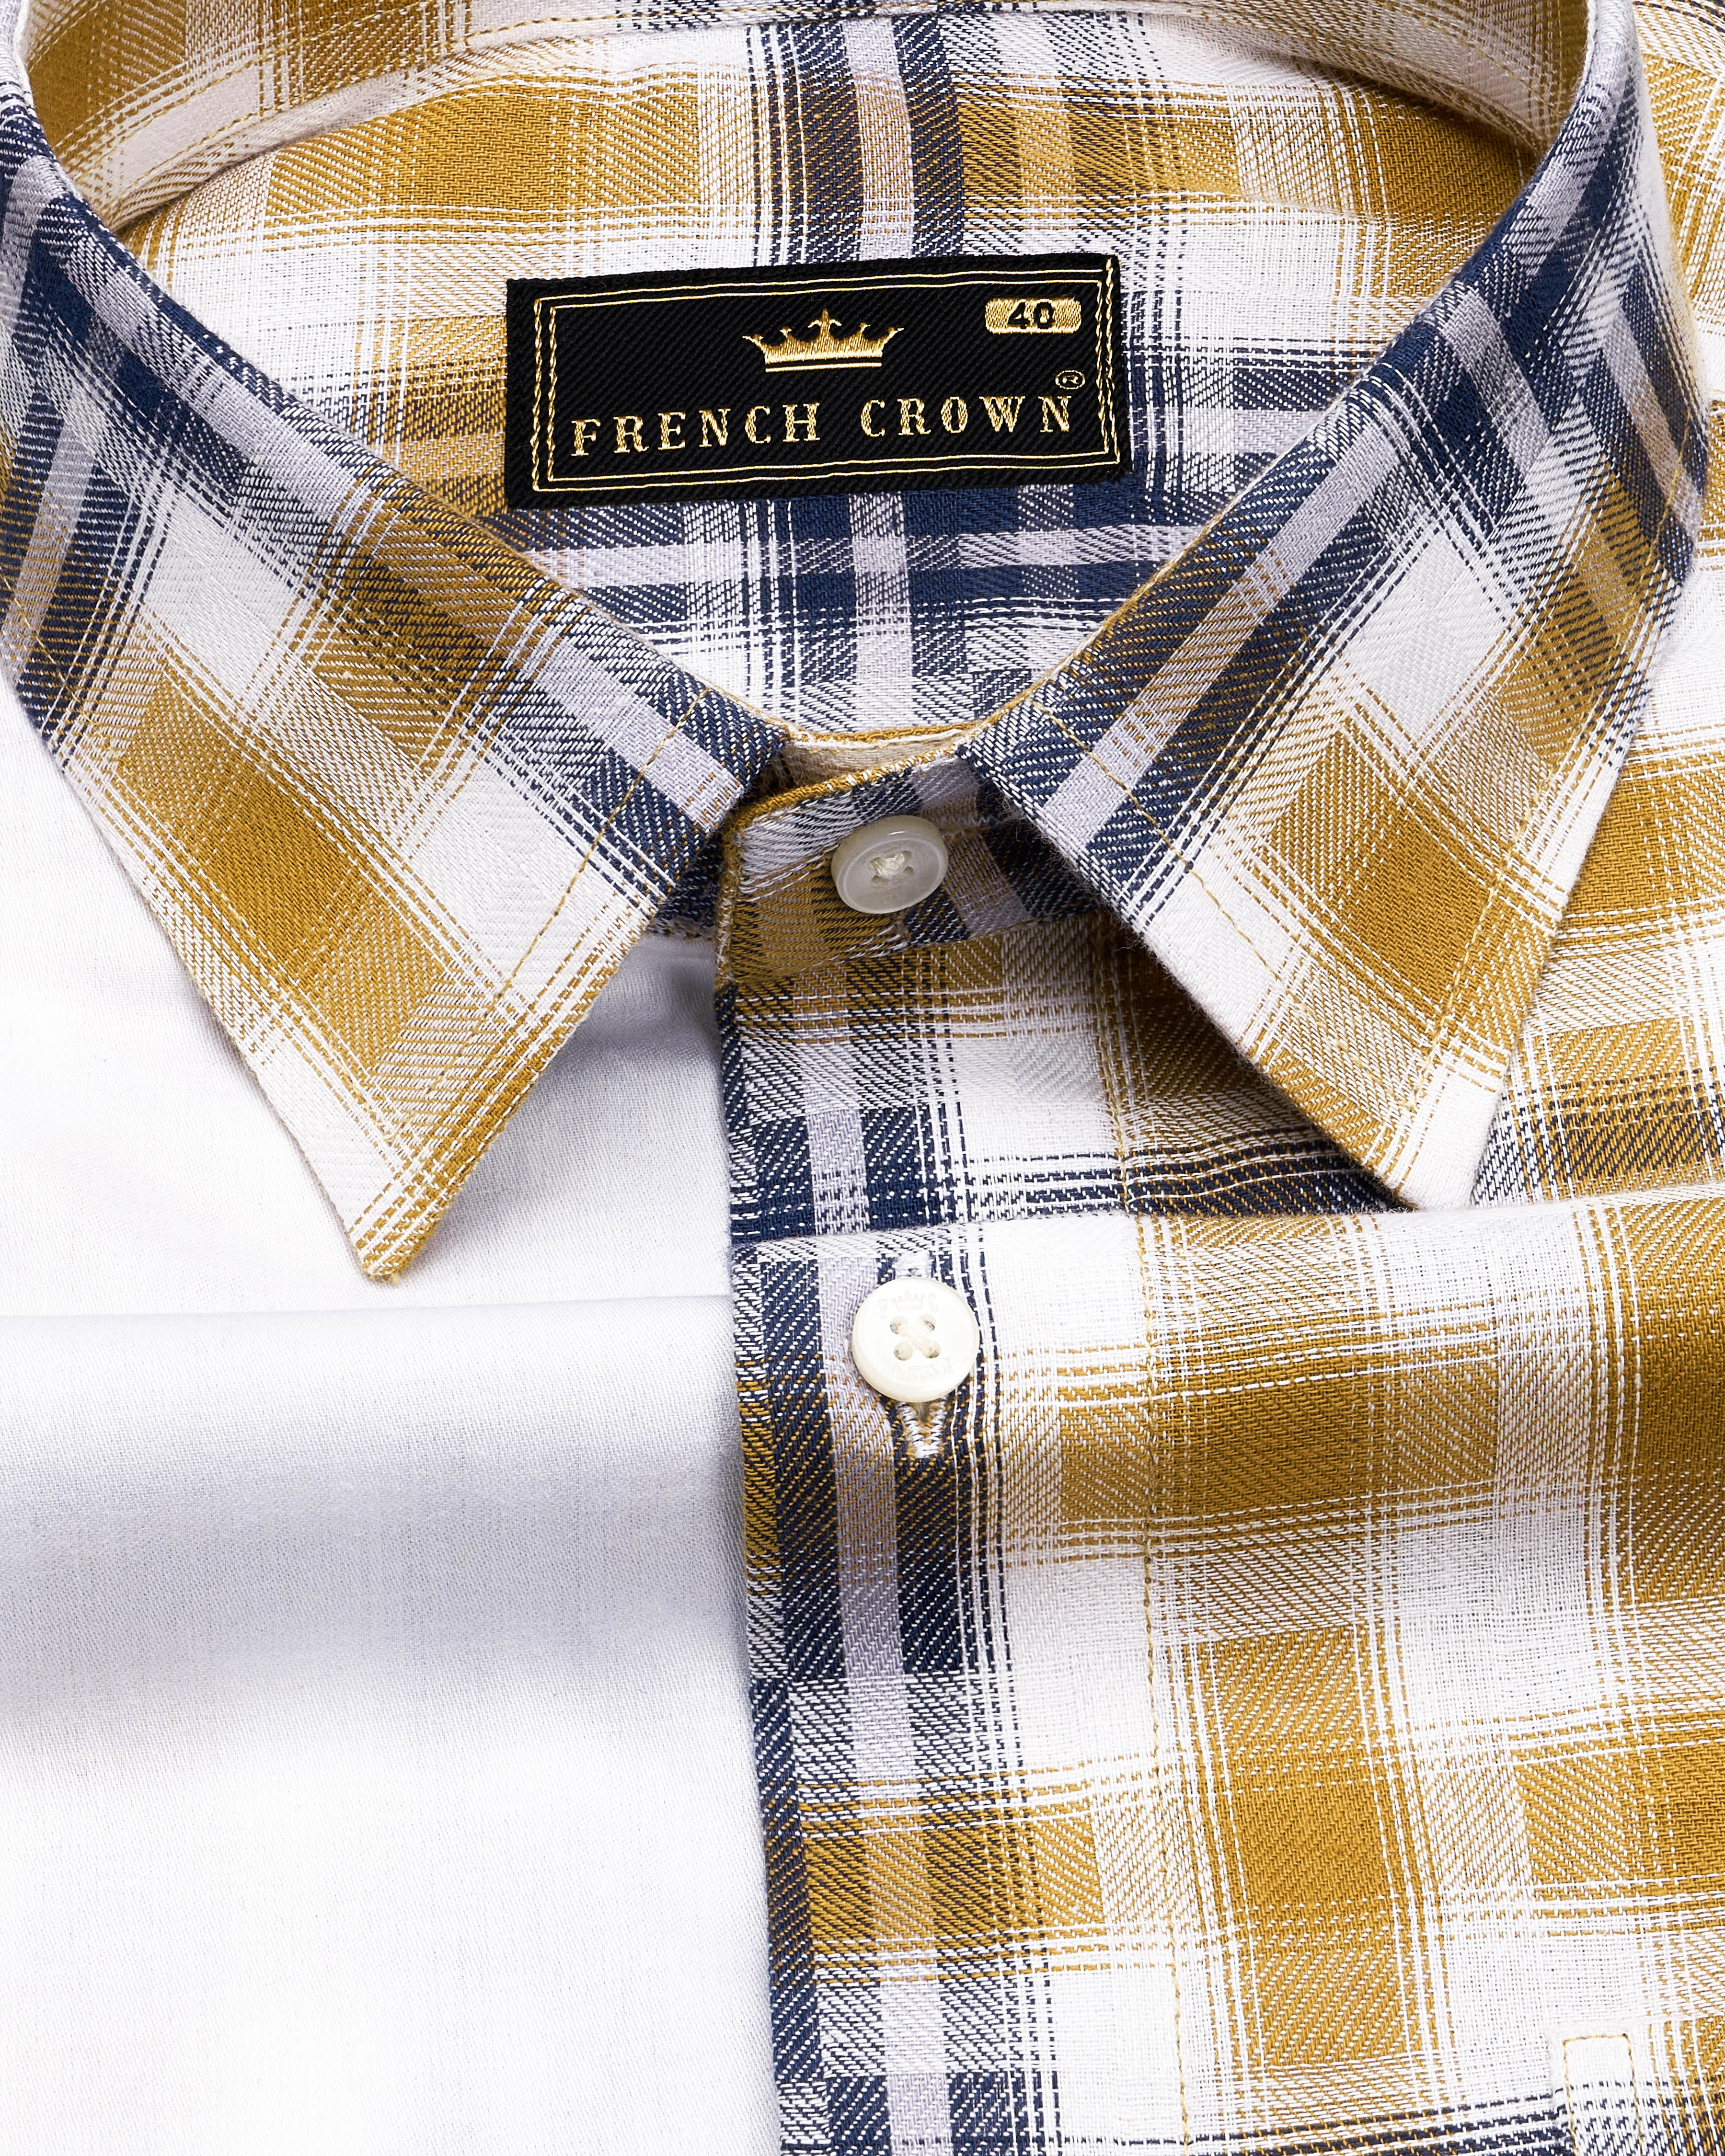 Bright White with Driftwood Brown and Firefly Blue Plaid Super Soft Premium Cotton Designer Shirt 6650-D5-E038-38,6650-D5-E038-H-38,6650-D5-E038-39,6650-D5-E038-H-39,6650-D5-E038-40,6650-D5-E038-H-40,6650-D5-E038-42,6650-D5-E038-H-42,6650-D5-E038-44,6650-D5-E038-H-44,6650-D5-E038-46,6650-D5-E038-H-46,6650-D5-E038-48,6650-D5-E038-H-48,6650-D5-E038-50,6650-D5-E038-H-50,6650-D5-E038-52,6650-D5-E038-H-52